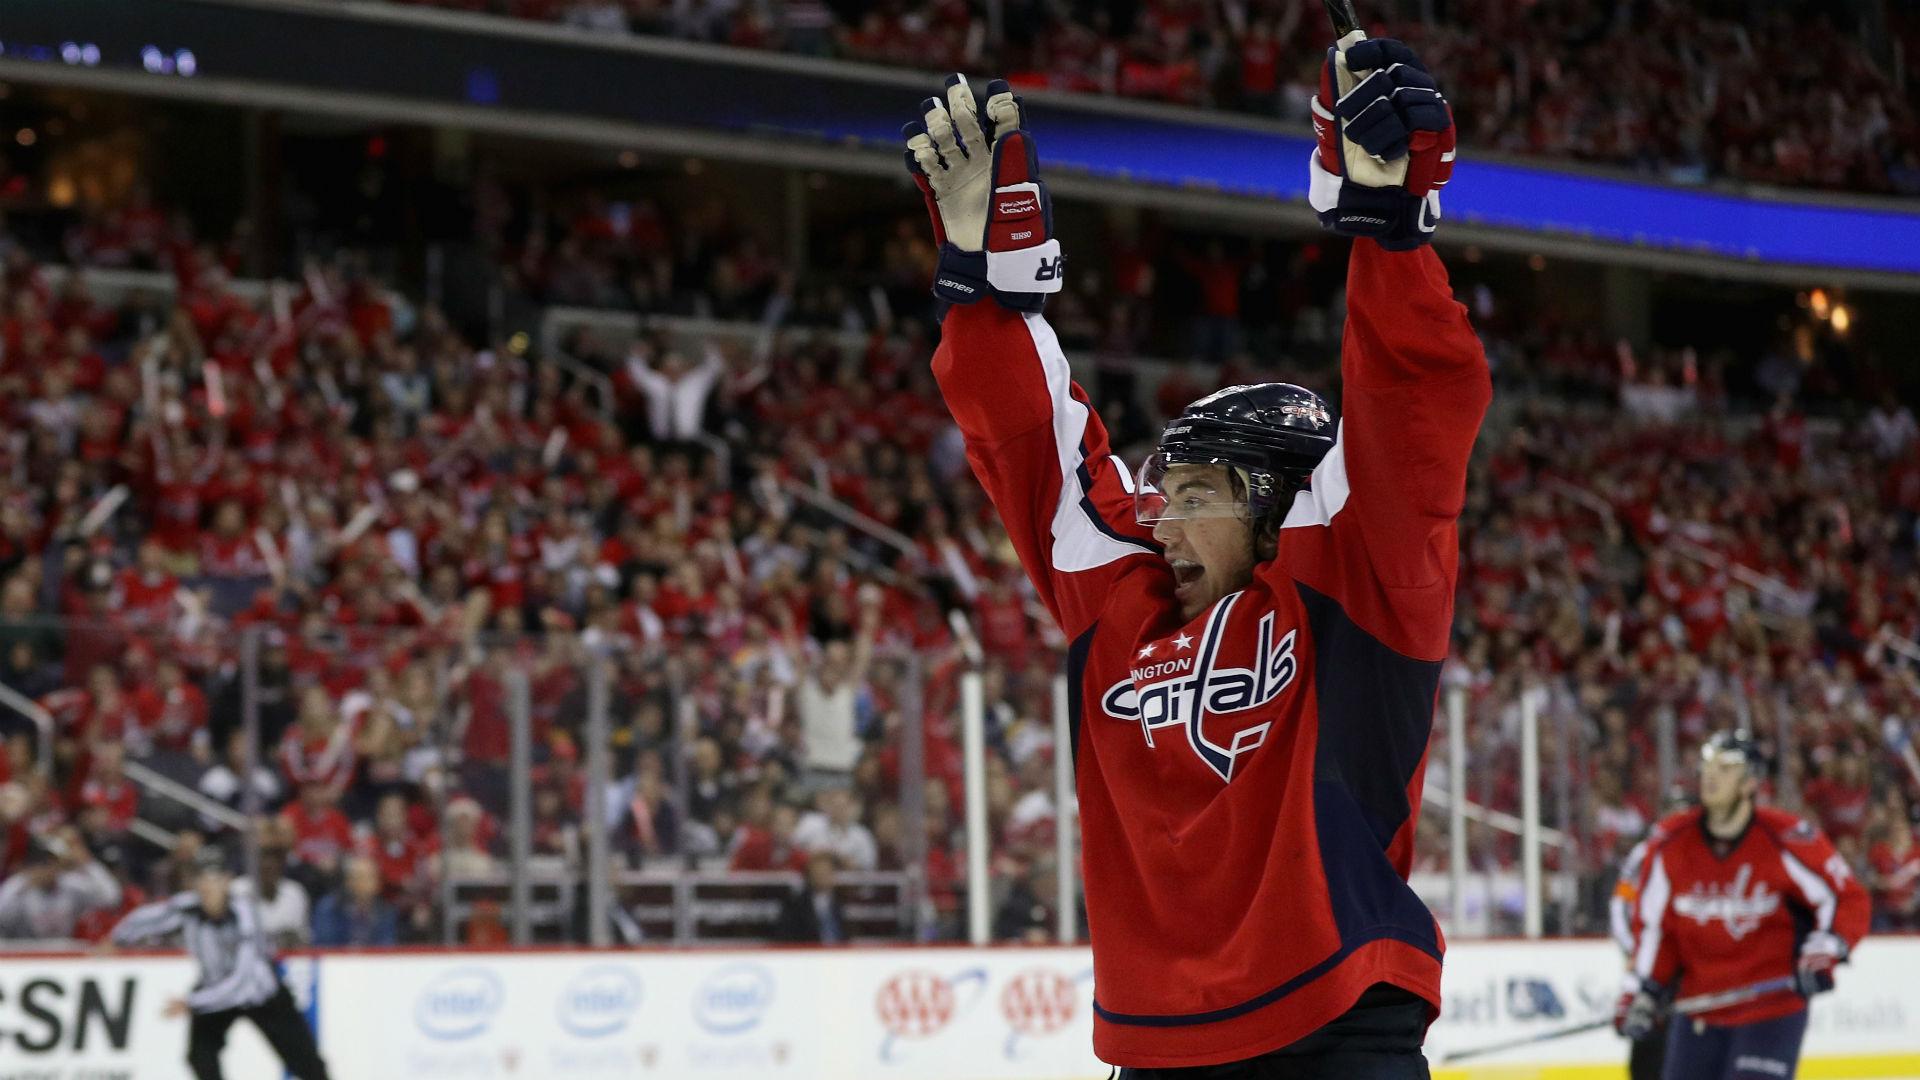 NHL Free Agency: T.J. Oshie Staying With Capitals On New 8 Year Deal